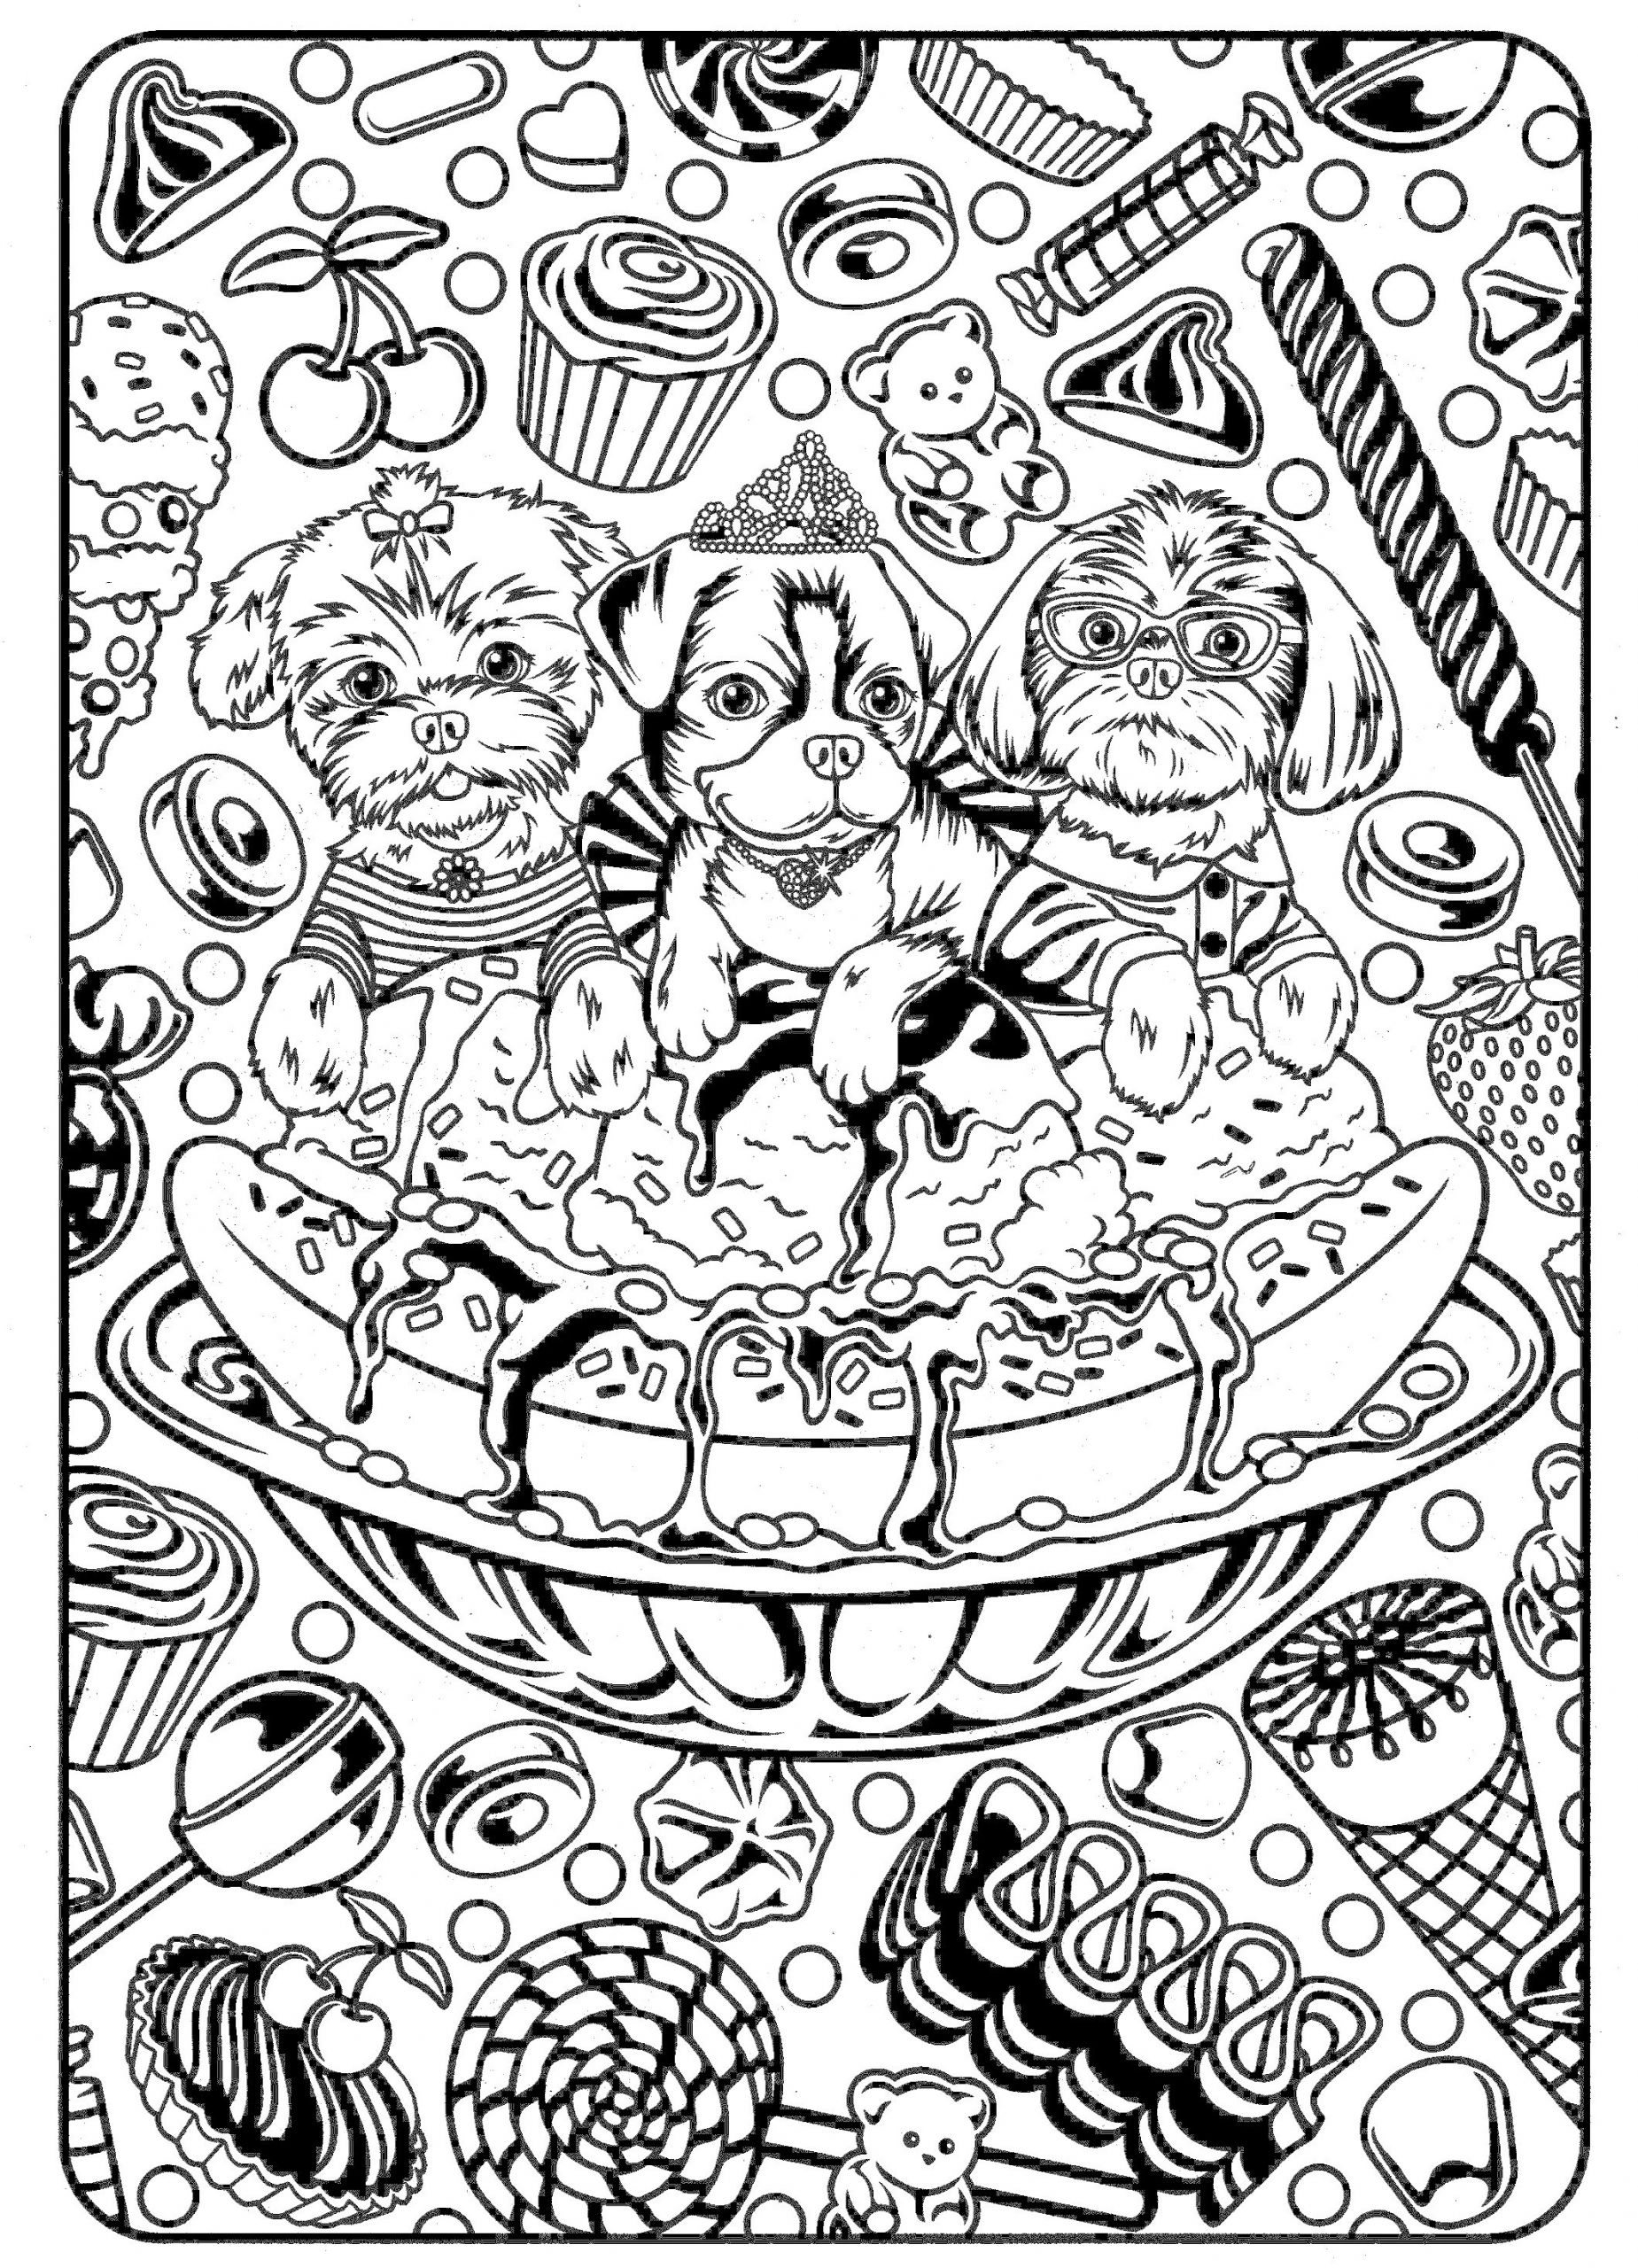 Adult Coloring Book Images
 Cute Coloring Pages Best Coloring Pages For Kids